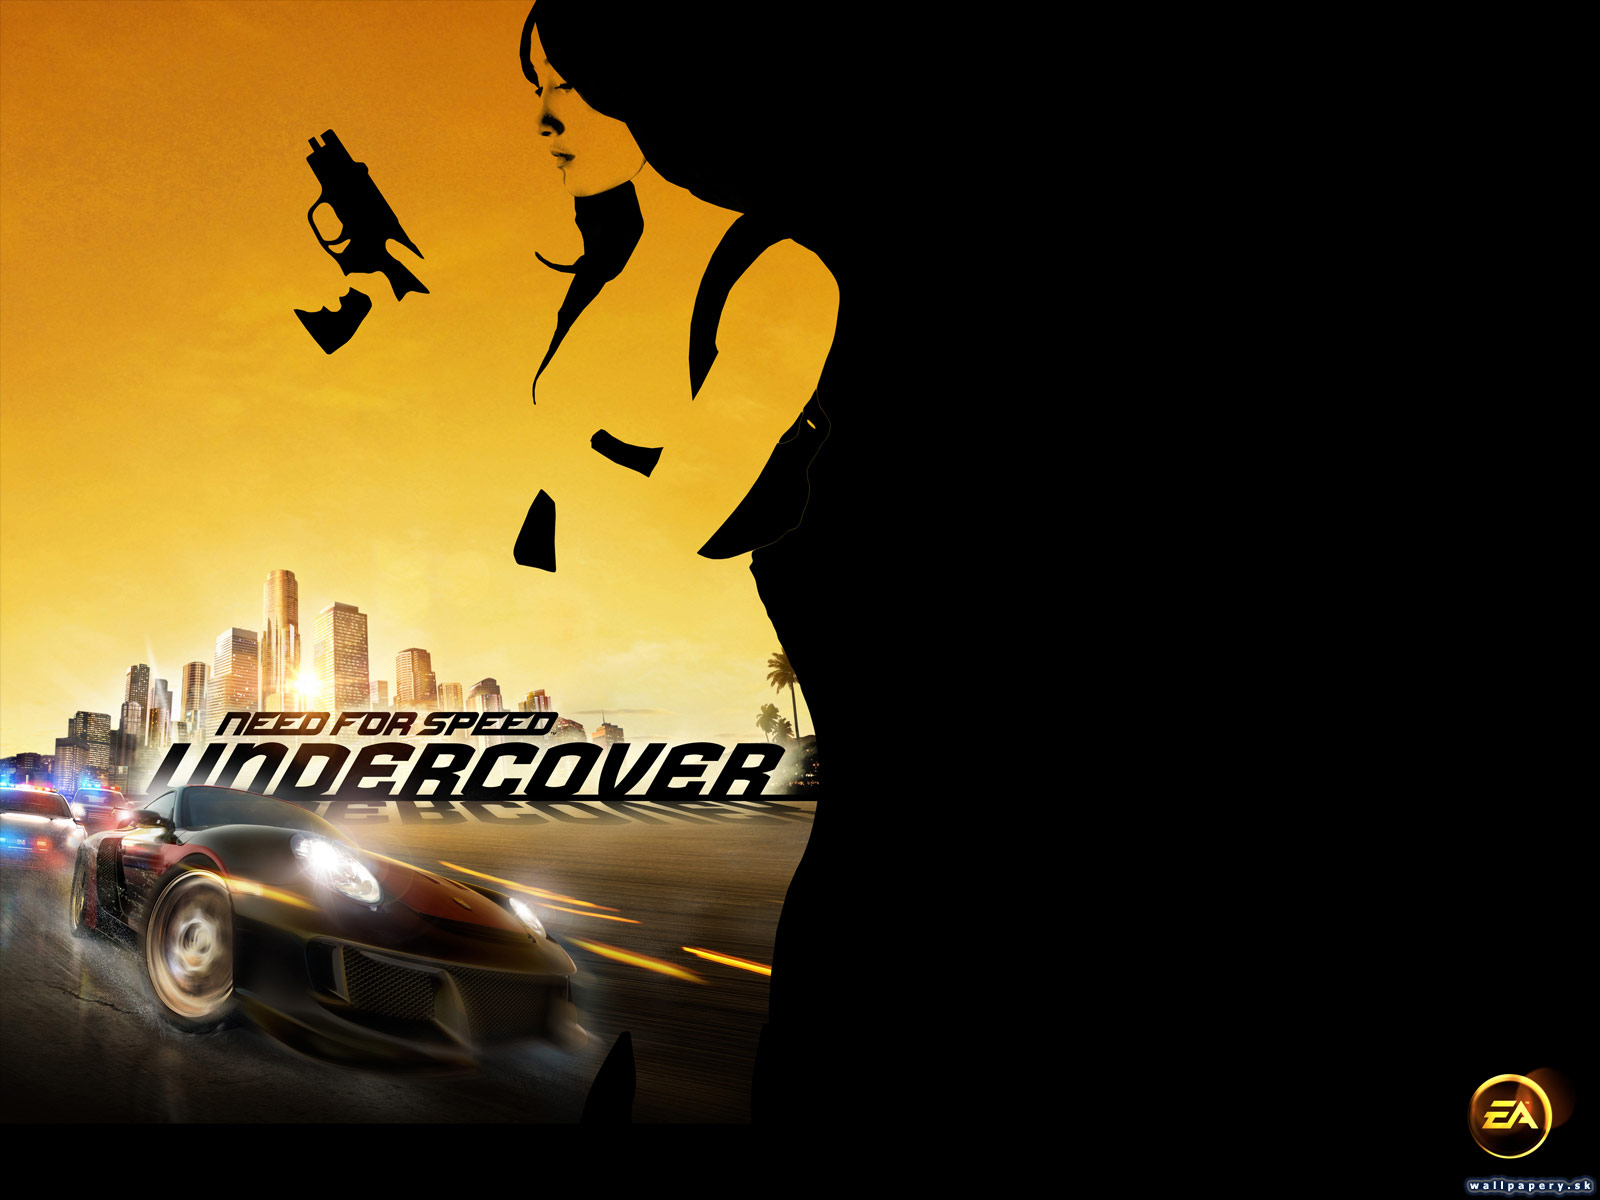 Need for Speed: Undercover - wallpaper 2